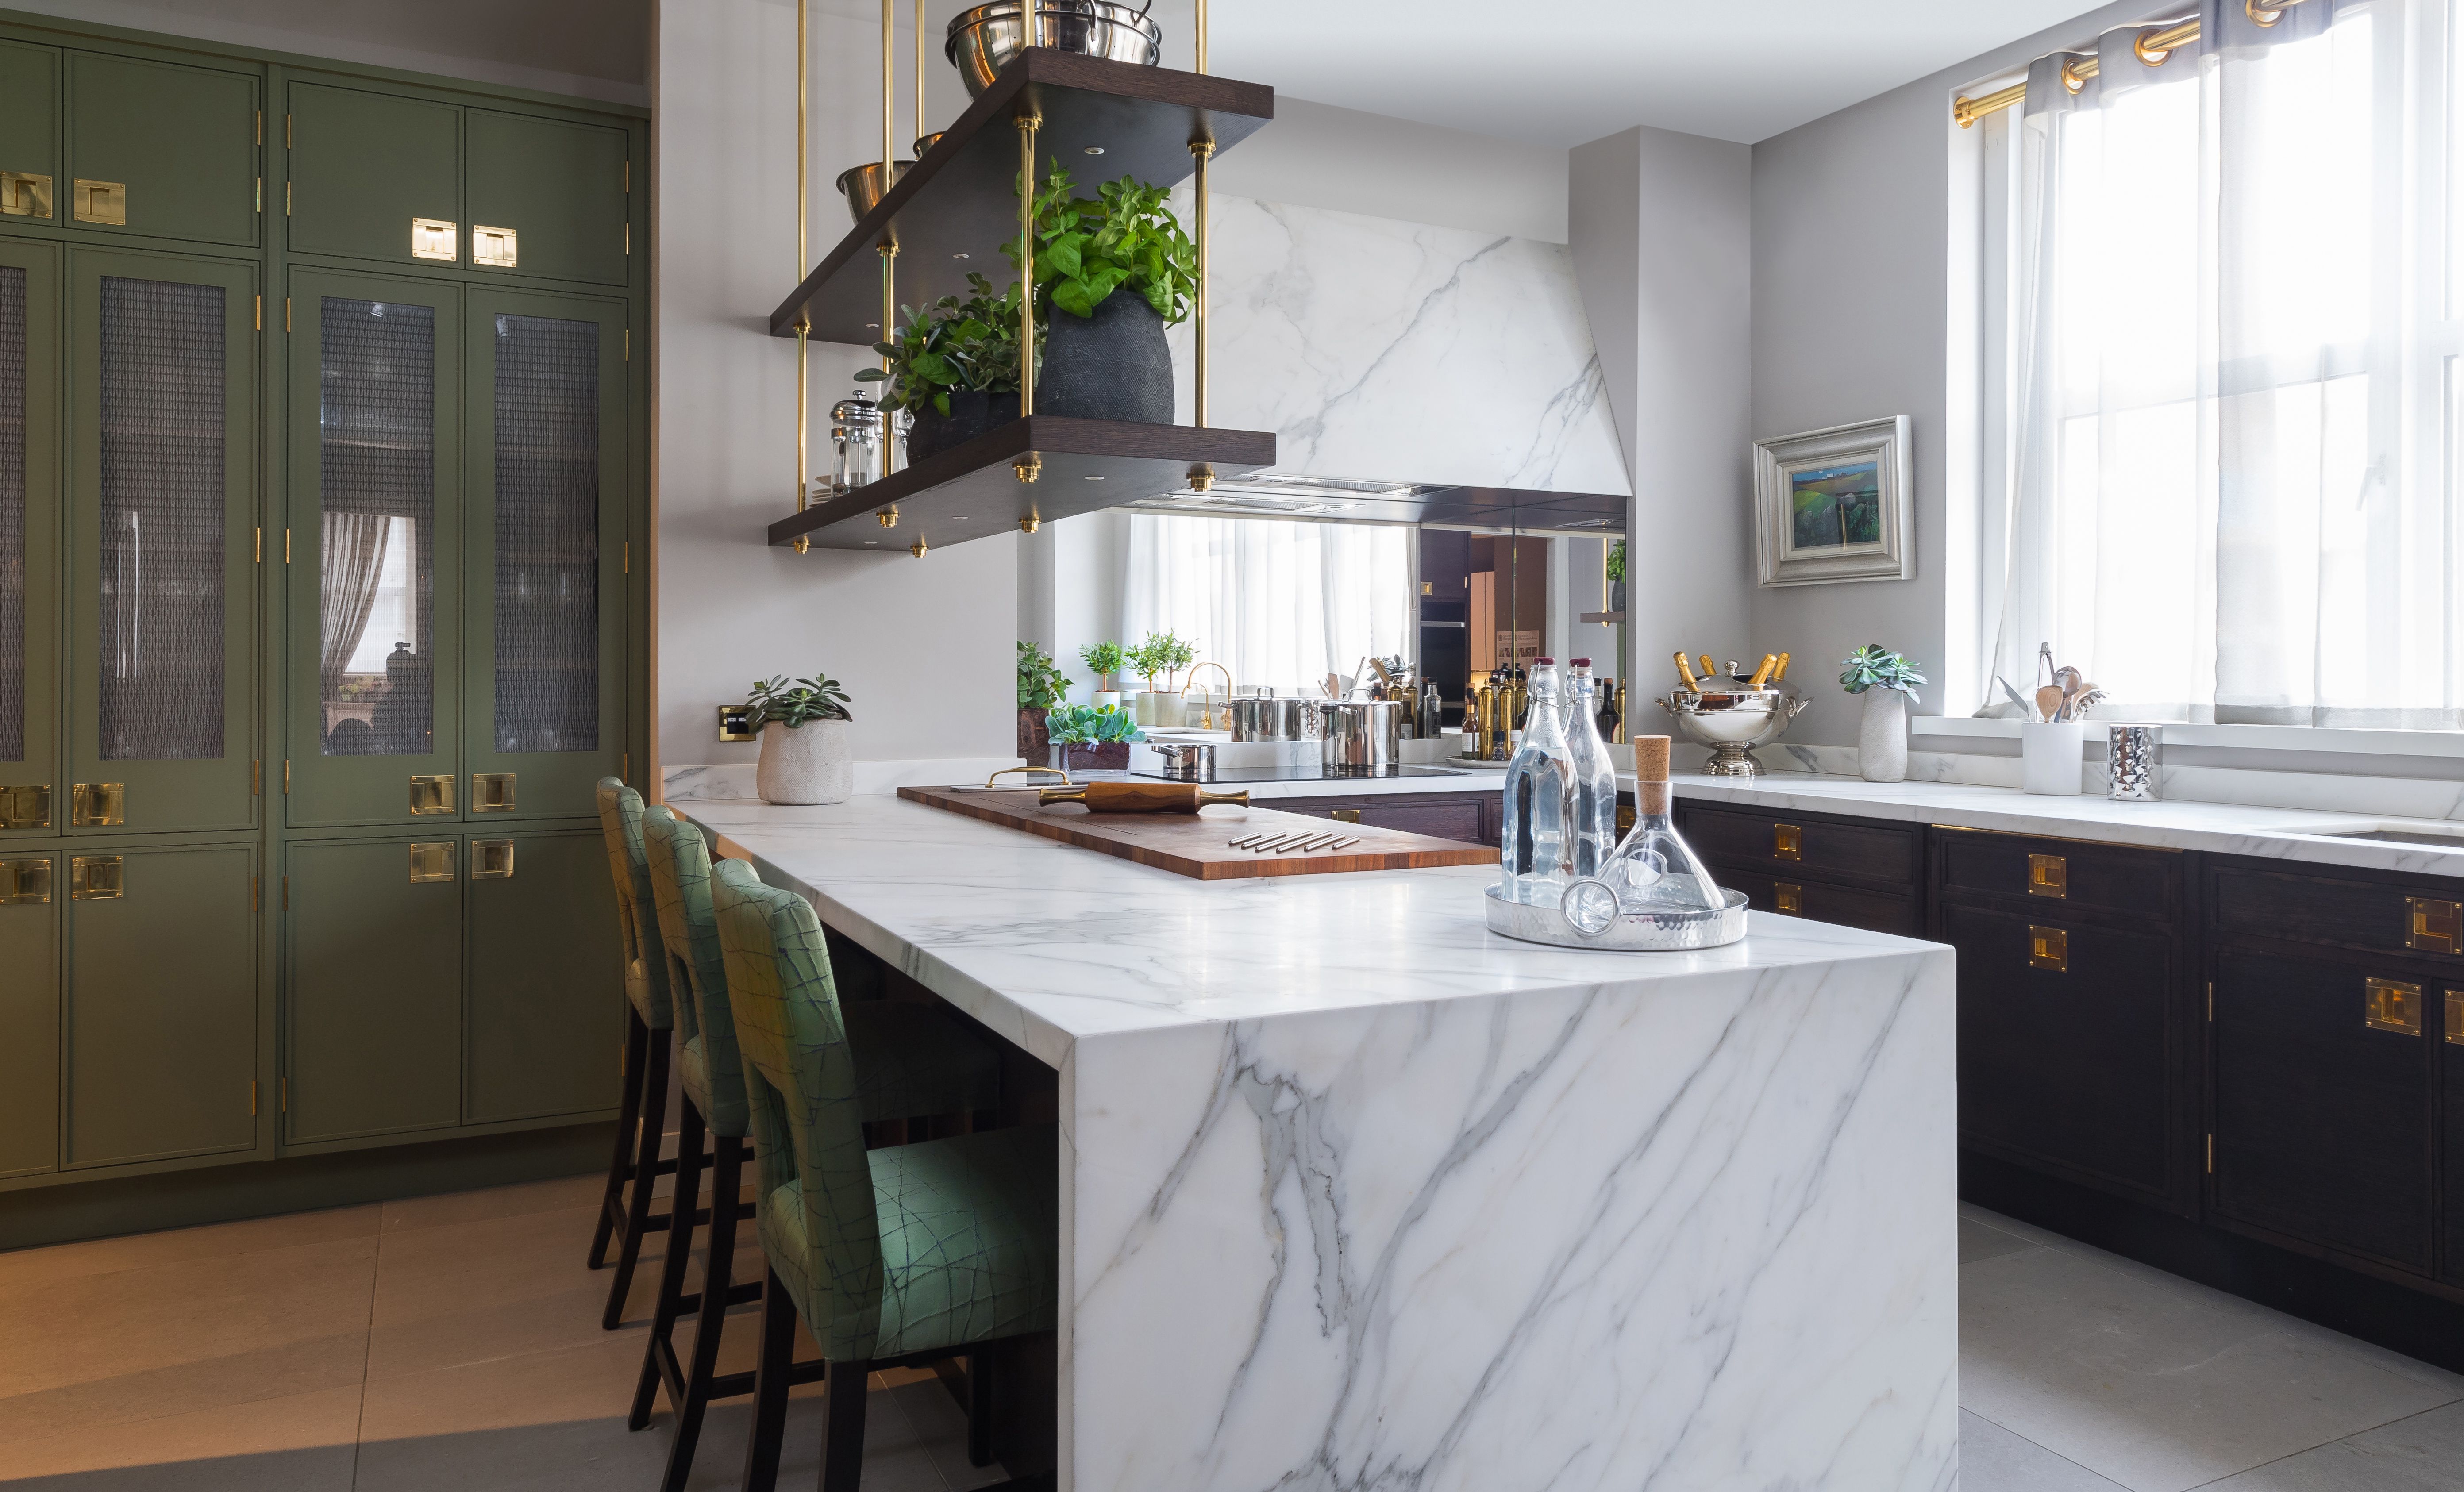 5 Reasons Green is THE Kitchen Color for 2021